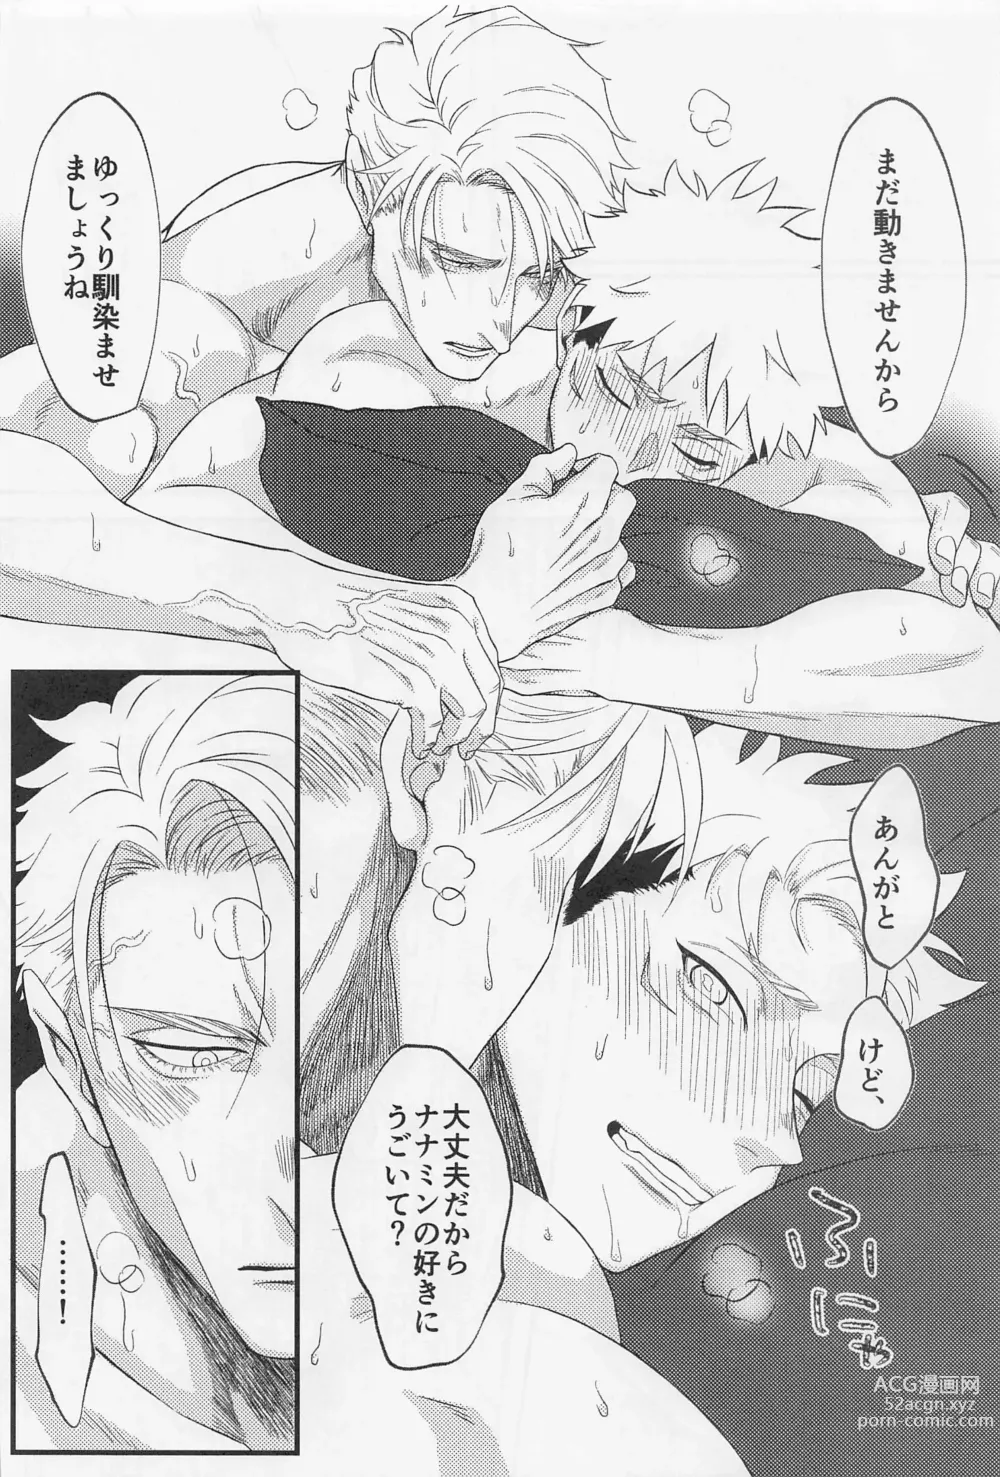 Page 10 of doujinshi Canopus